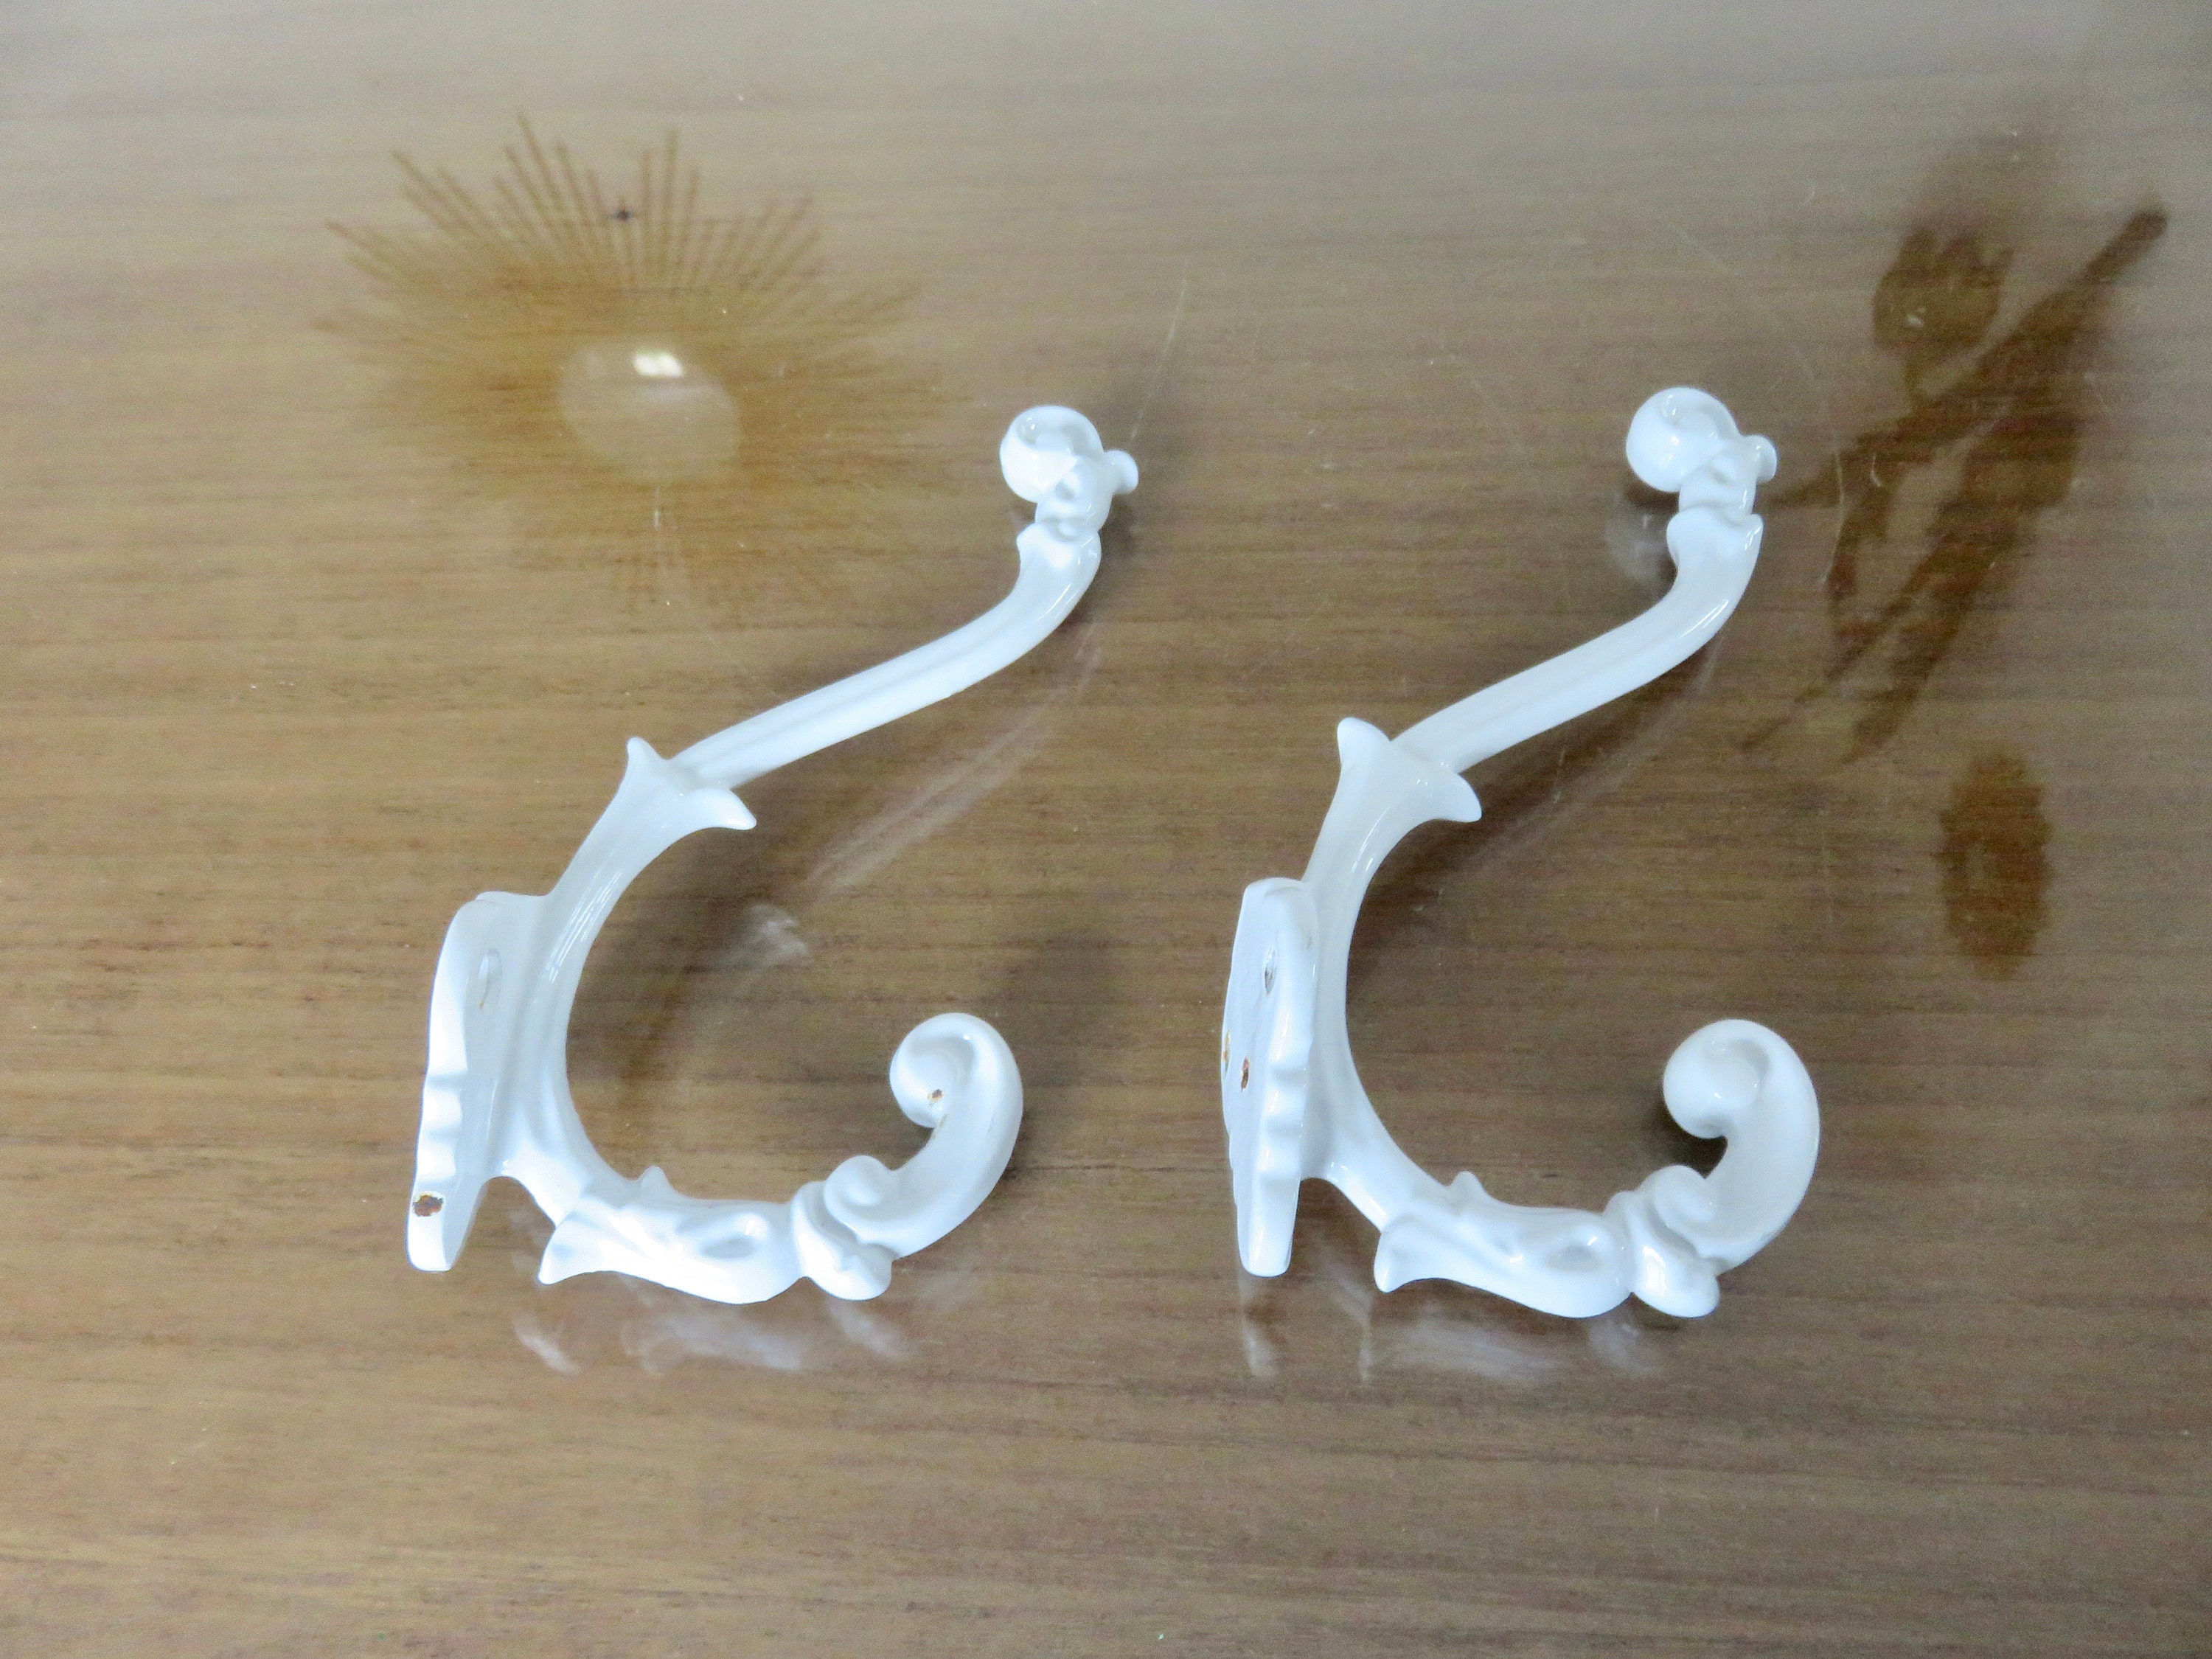 Pair of Wall Hooks, Coat Rack, Art Deco, White Cast Iron, French  Manufacturing 1930 1940 30's 40's Vintage Bistro, School 